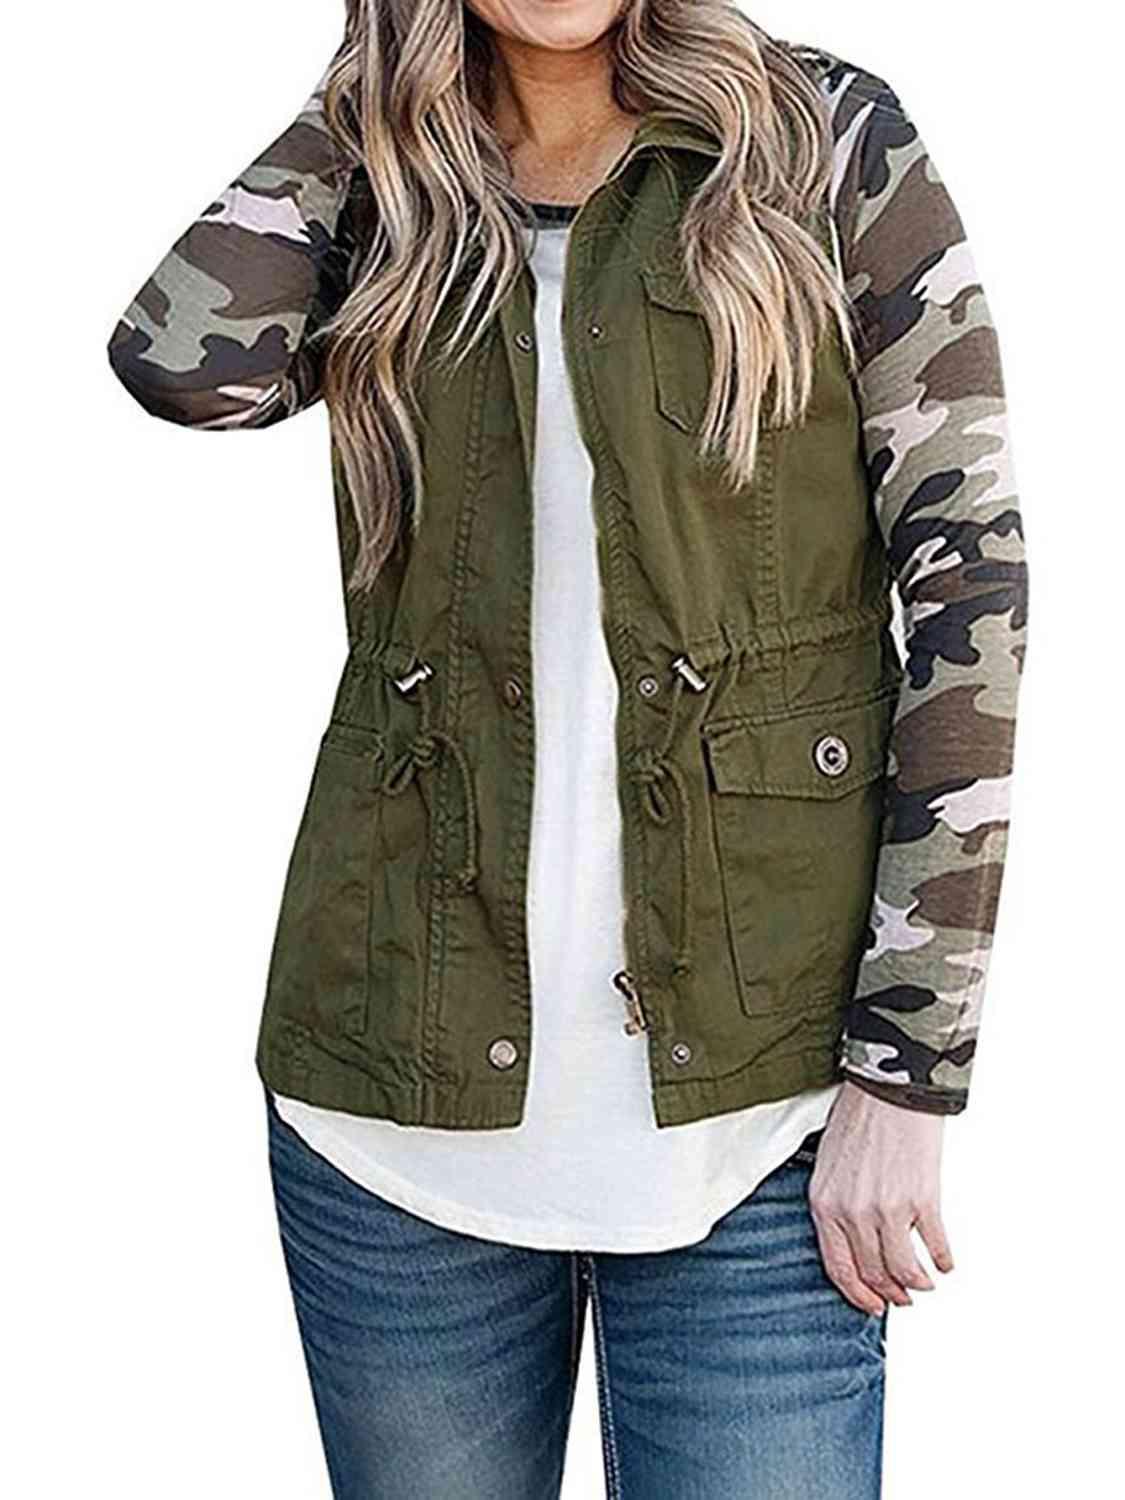 a woman wearing a camo jacket and jeans